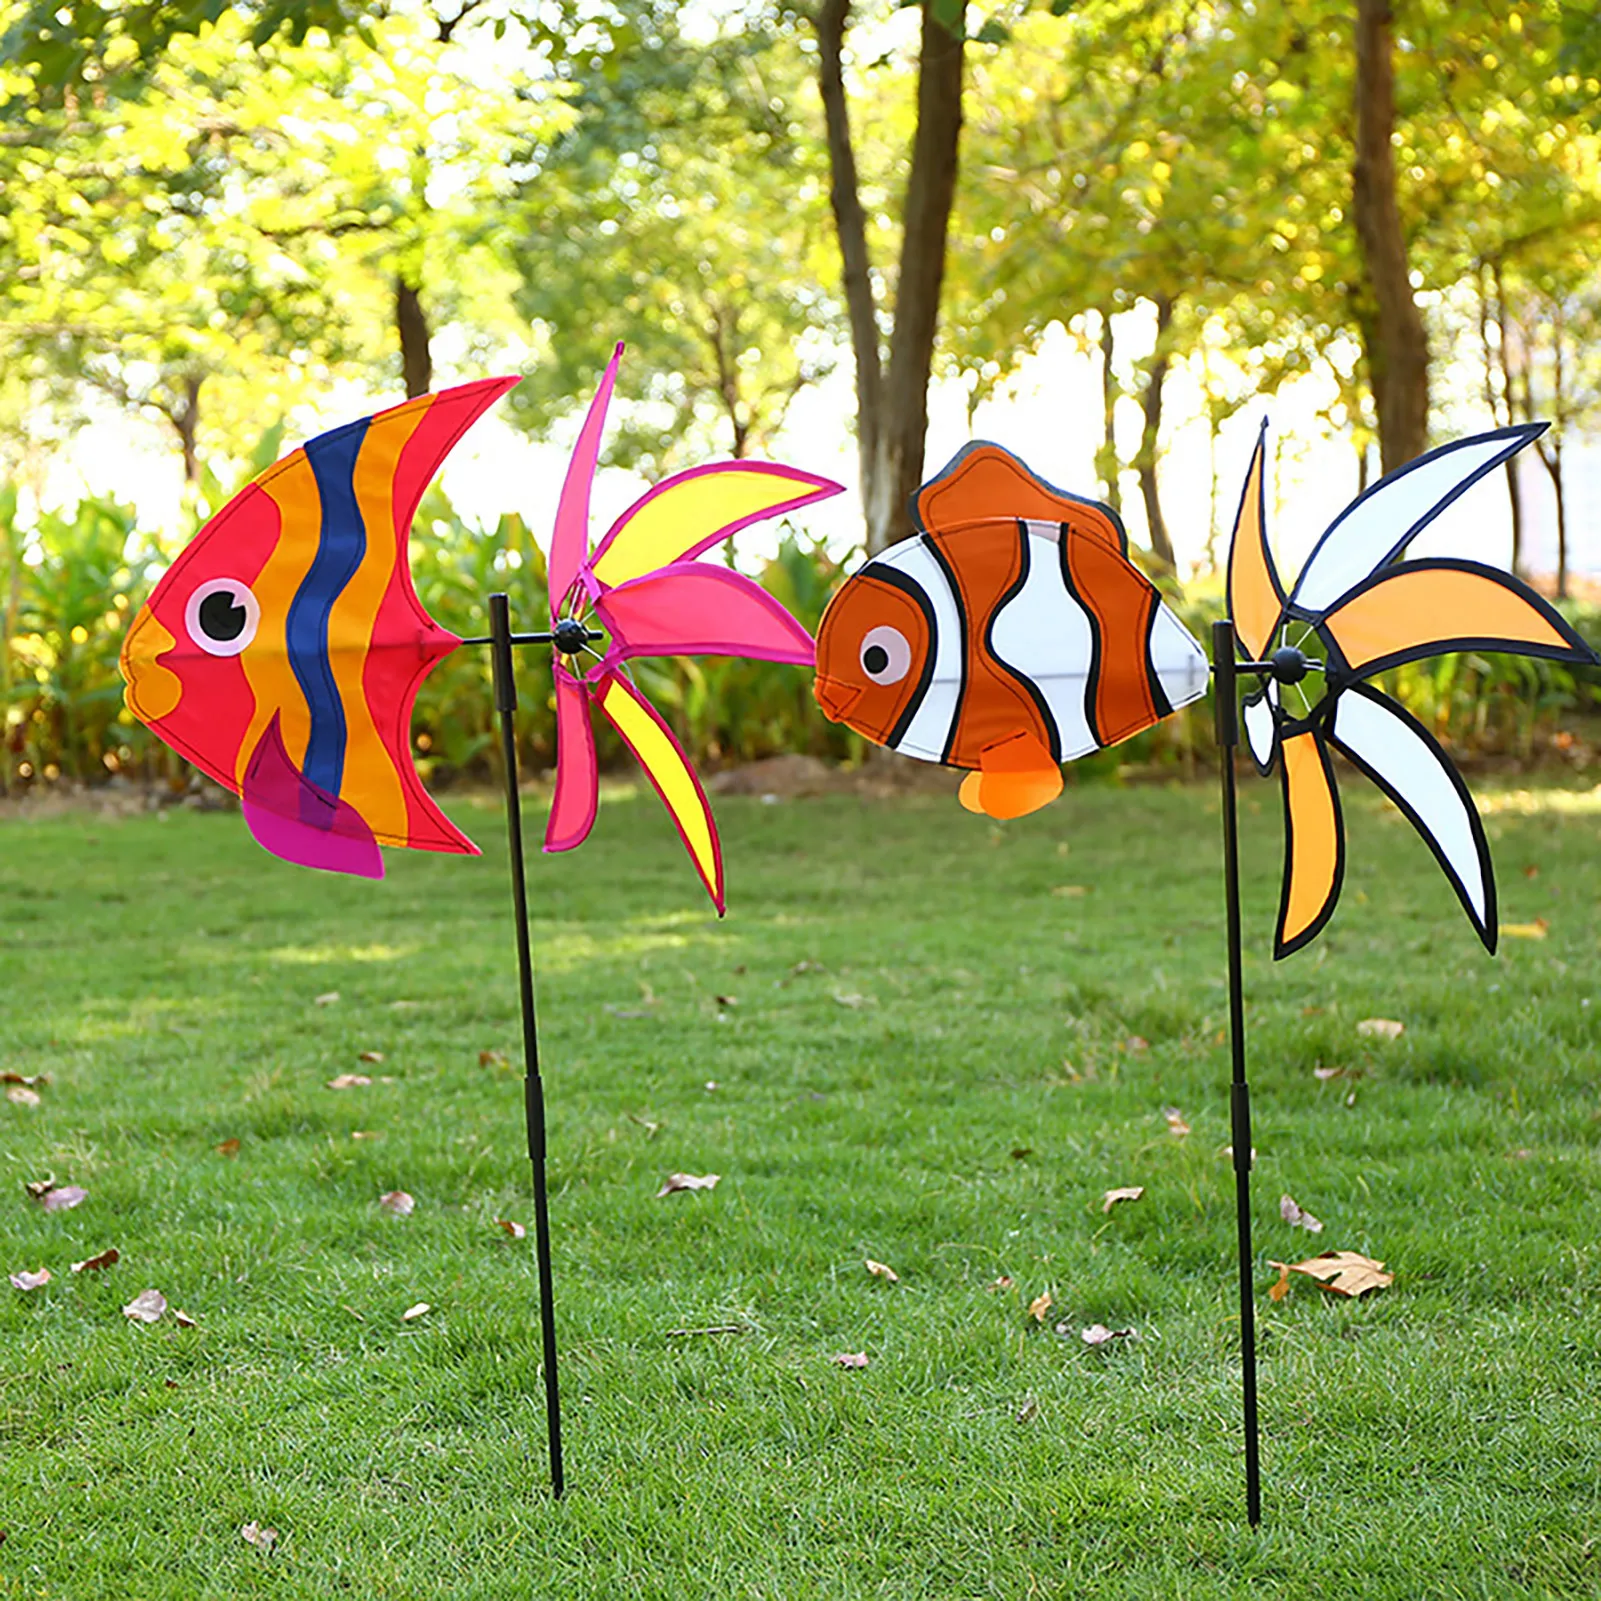 

Colorful Windmill Toys Pinwheel Windmill Home Garden Yard Decor Outdoor Gifts Children's Toy Scare Birds Away Wind Spinner